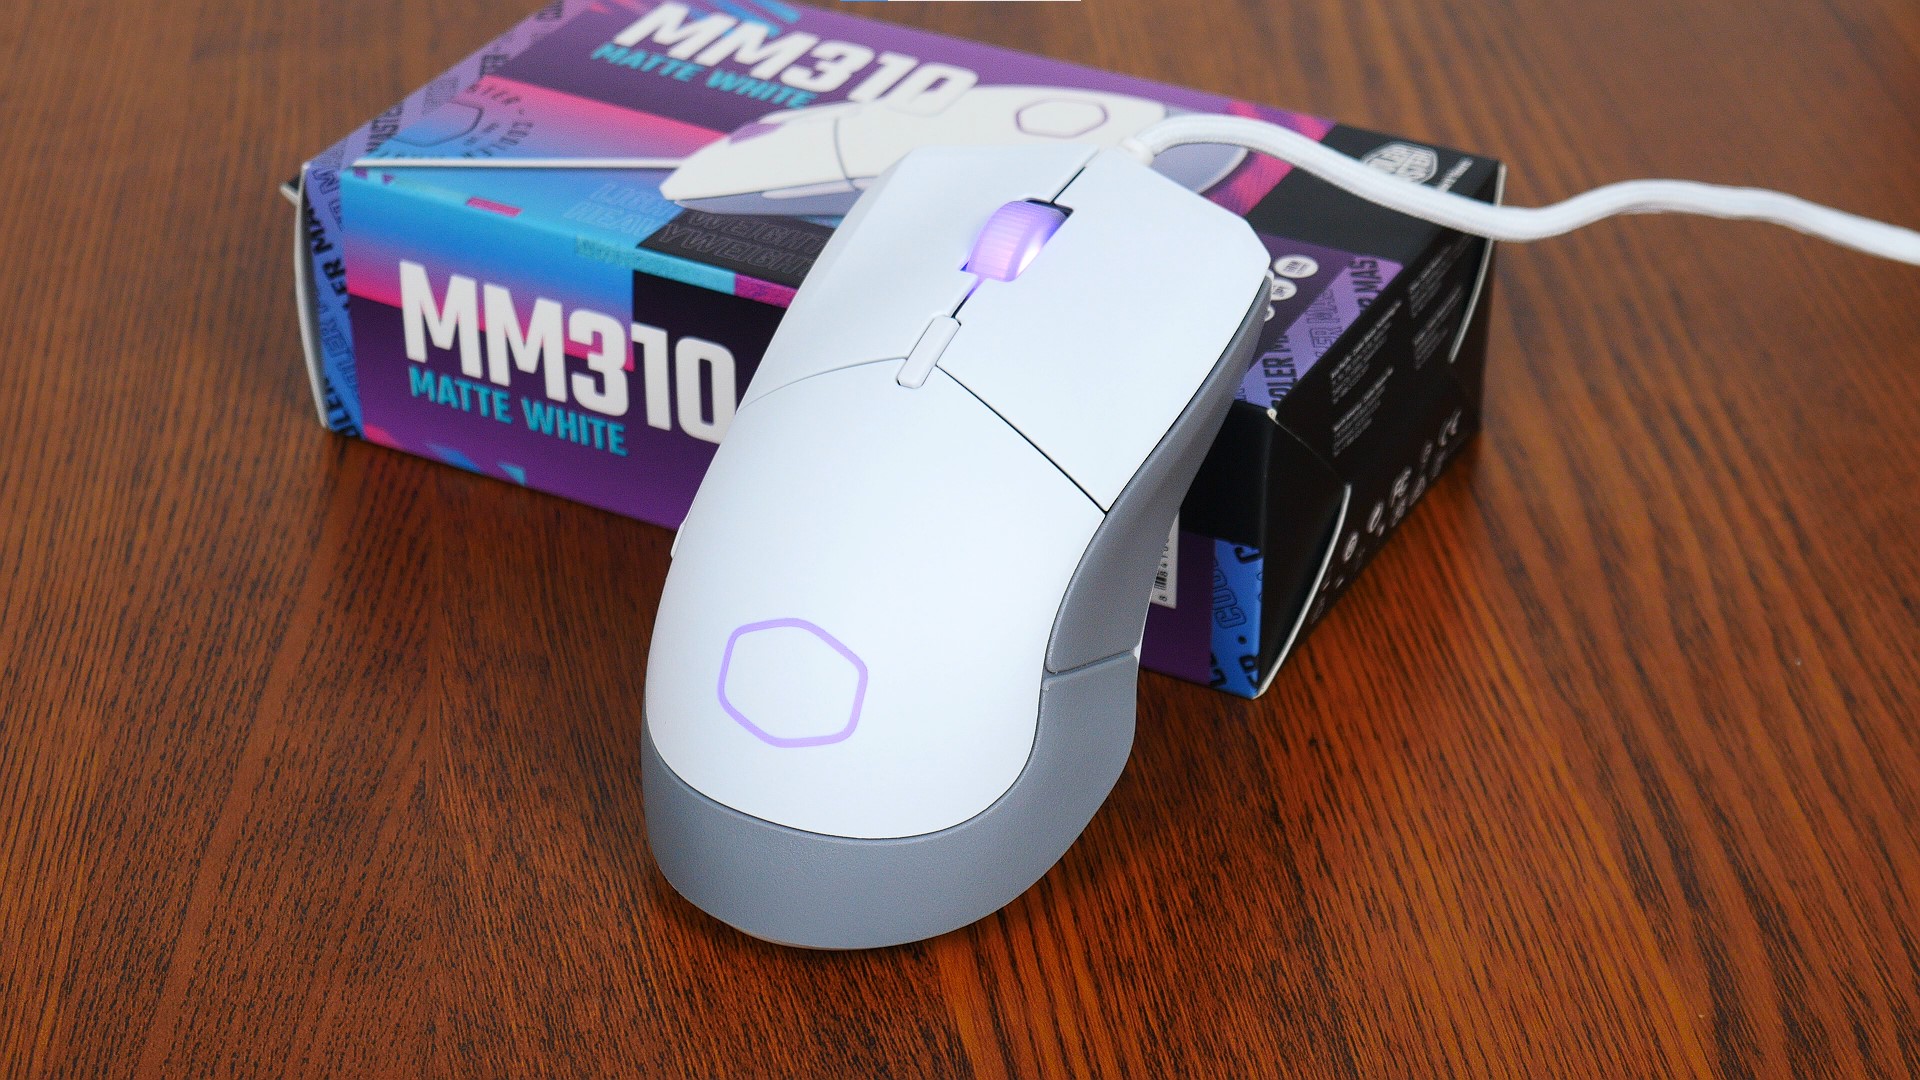 Cooler Master MM310 Wired Gaming Mouse